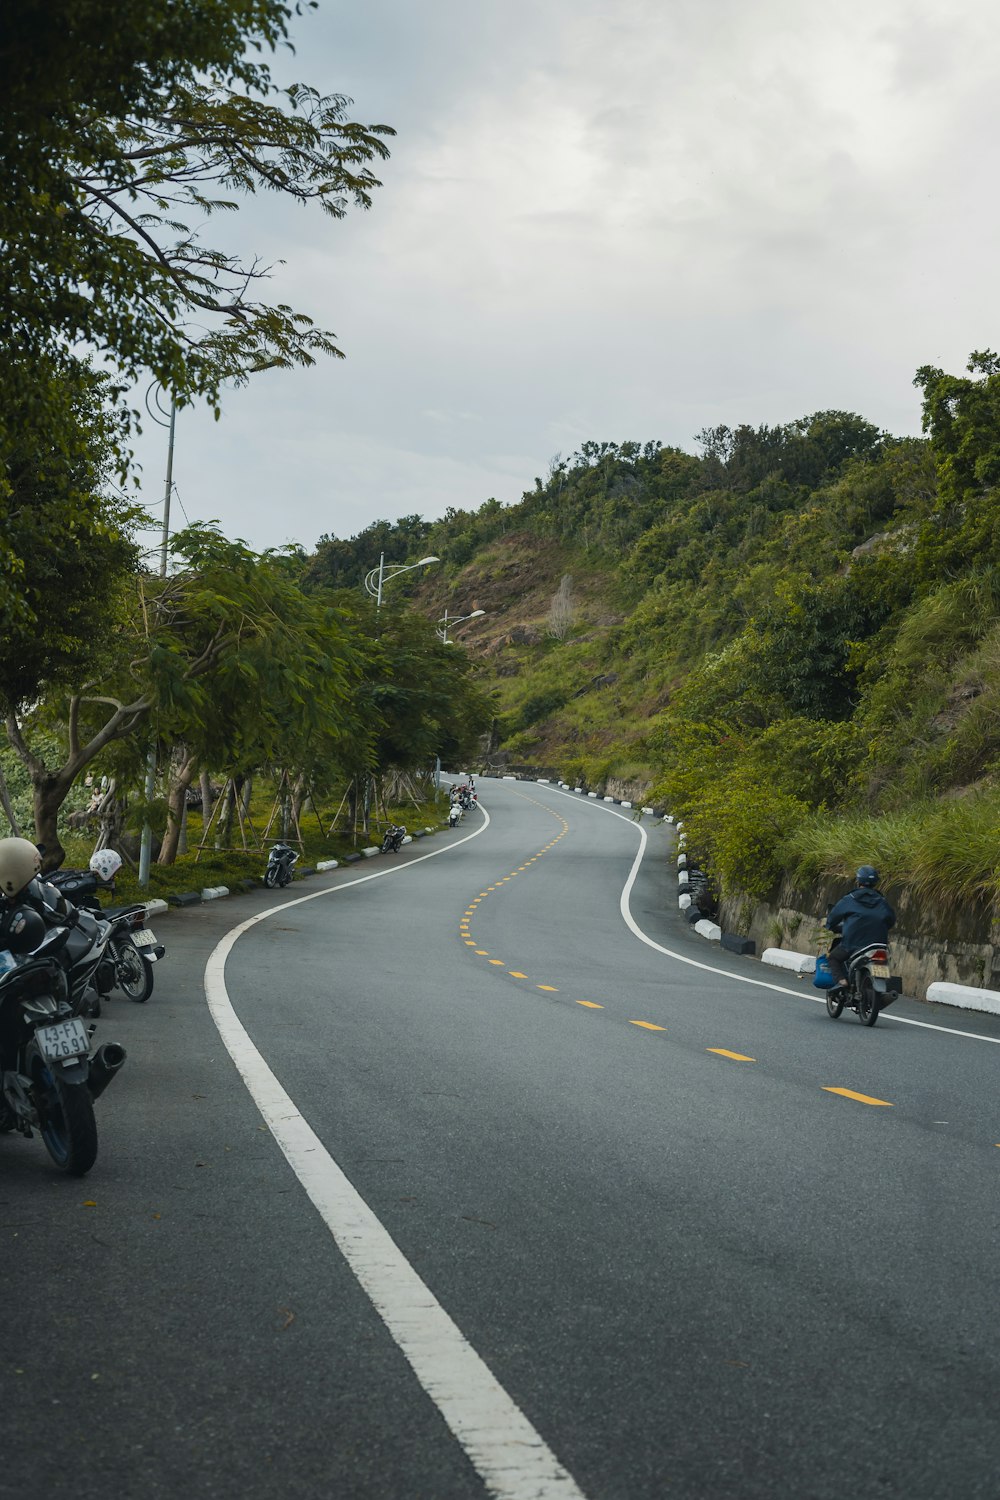 a couple of people riding motorcycles down a curvy road